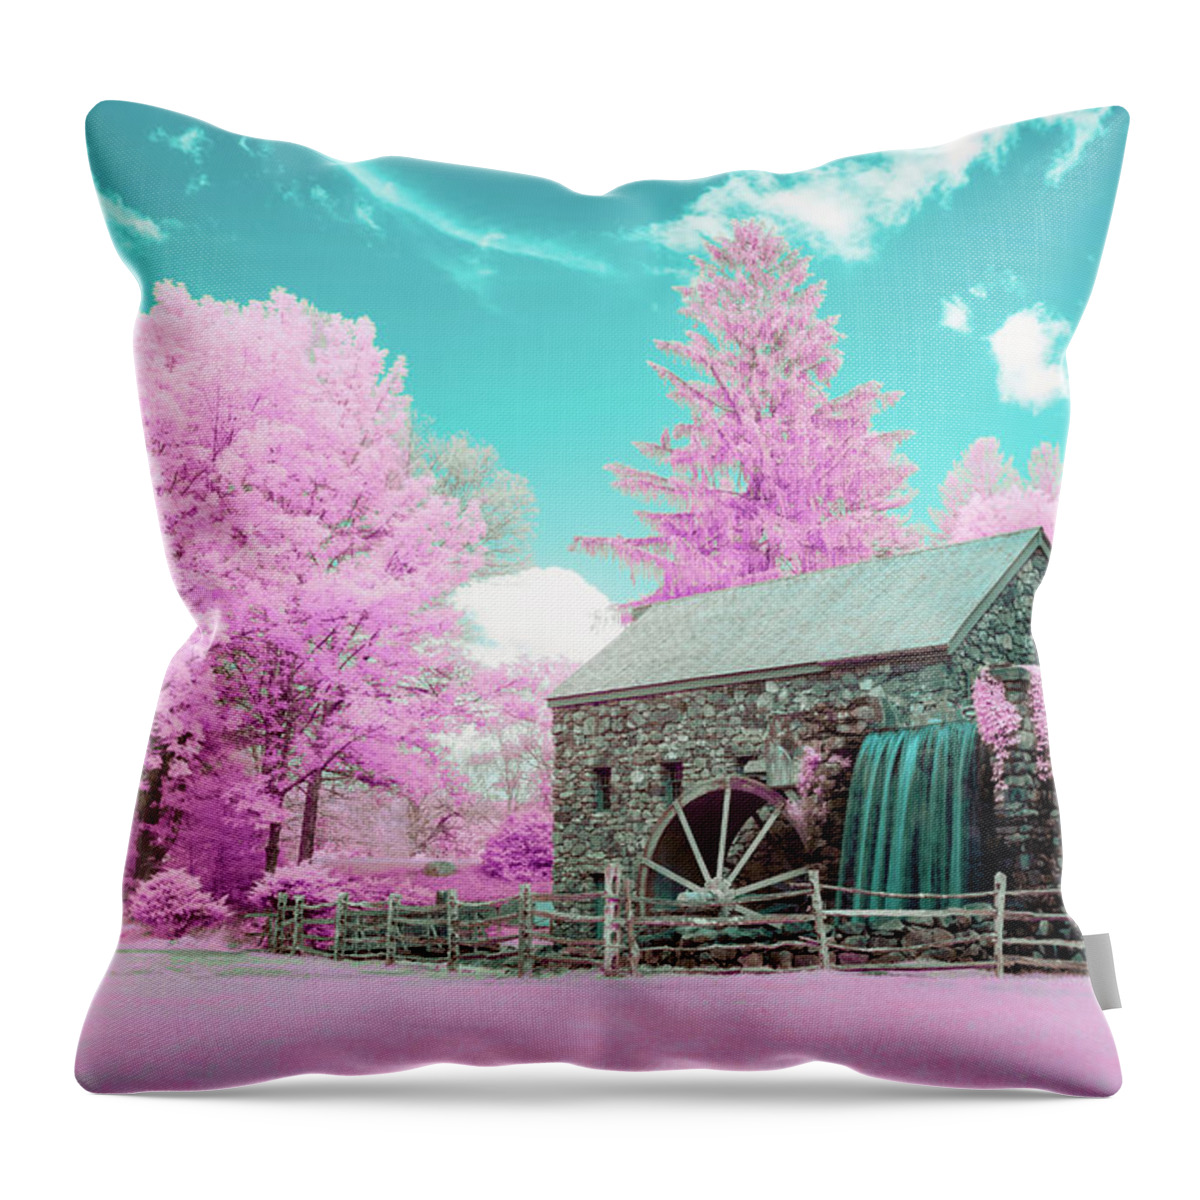 Infrared Grist Mill Ir Infra Red Pink Blue Cotton Candy Sudbury Historic Iconic Waterwheel Water Wheel Waterfall Falls Fall Spring Outside Outdoors Stone Wall Architecture Building Fence Wooden Field Trees Sky Clouds Cloudy Ma Mass Massachusetts Brian Hale Brianhalephoto Newengland New England U.s.a. Usa Unique Different Throw Pillow featuring the photograph Cotton Candy Grist Mill by Brian Hale